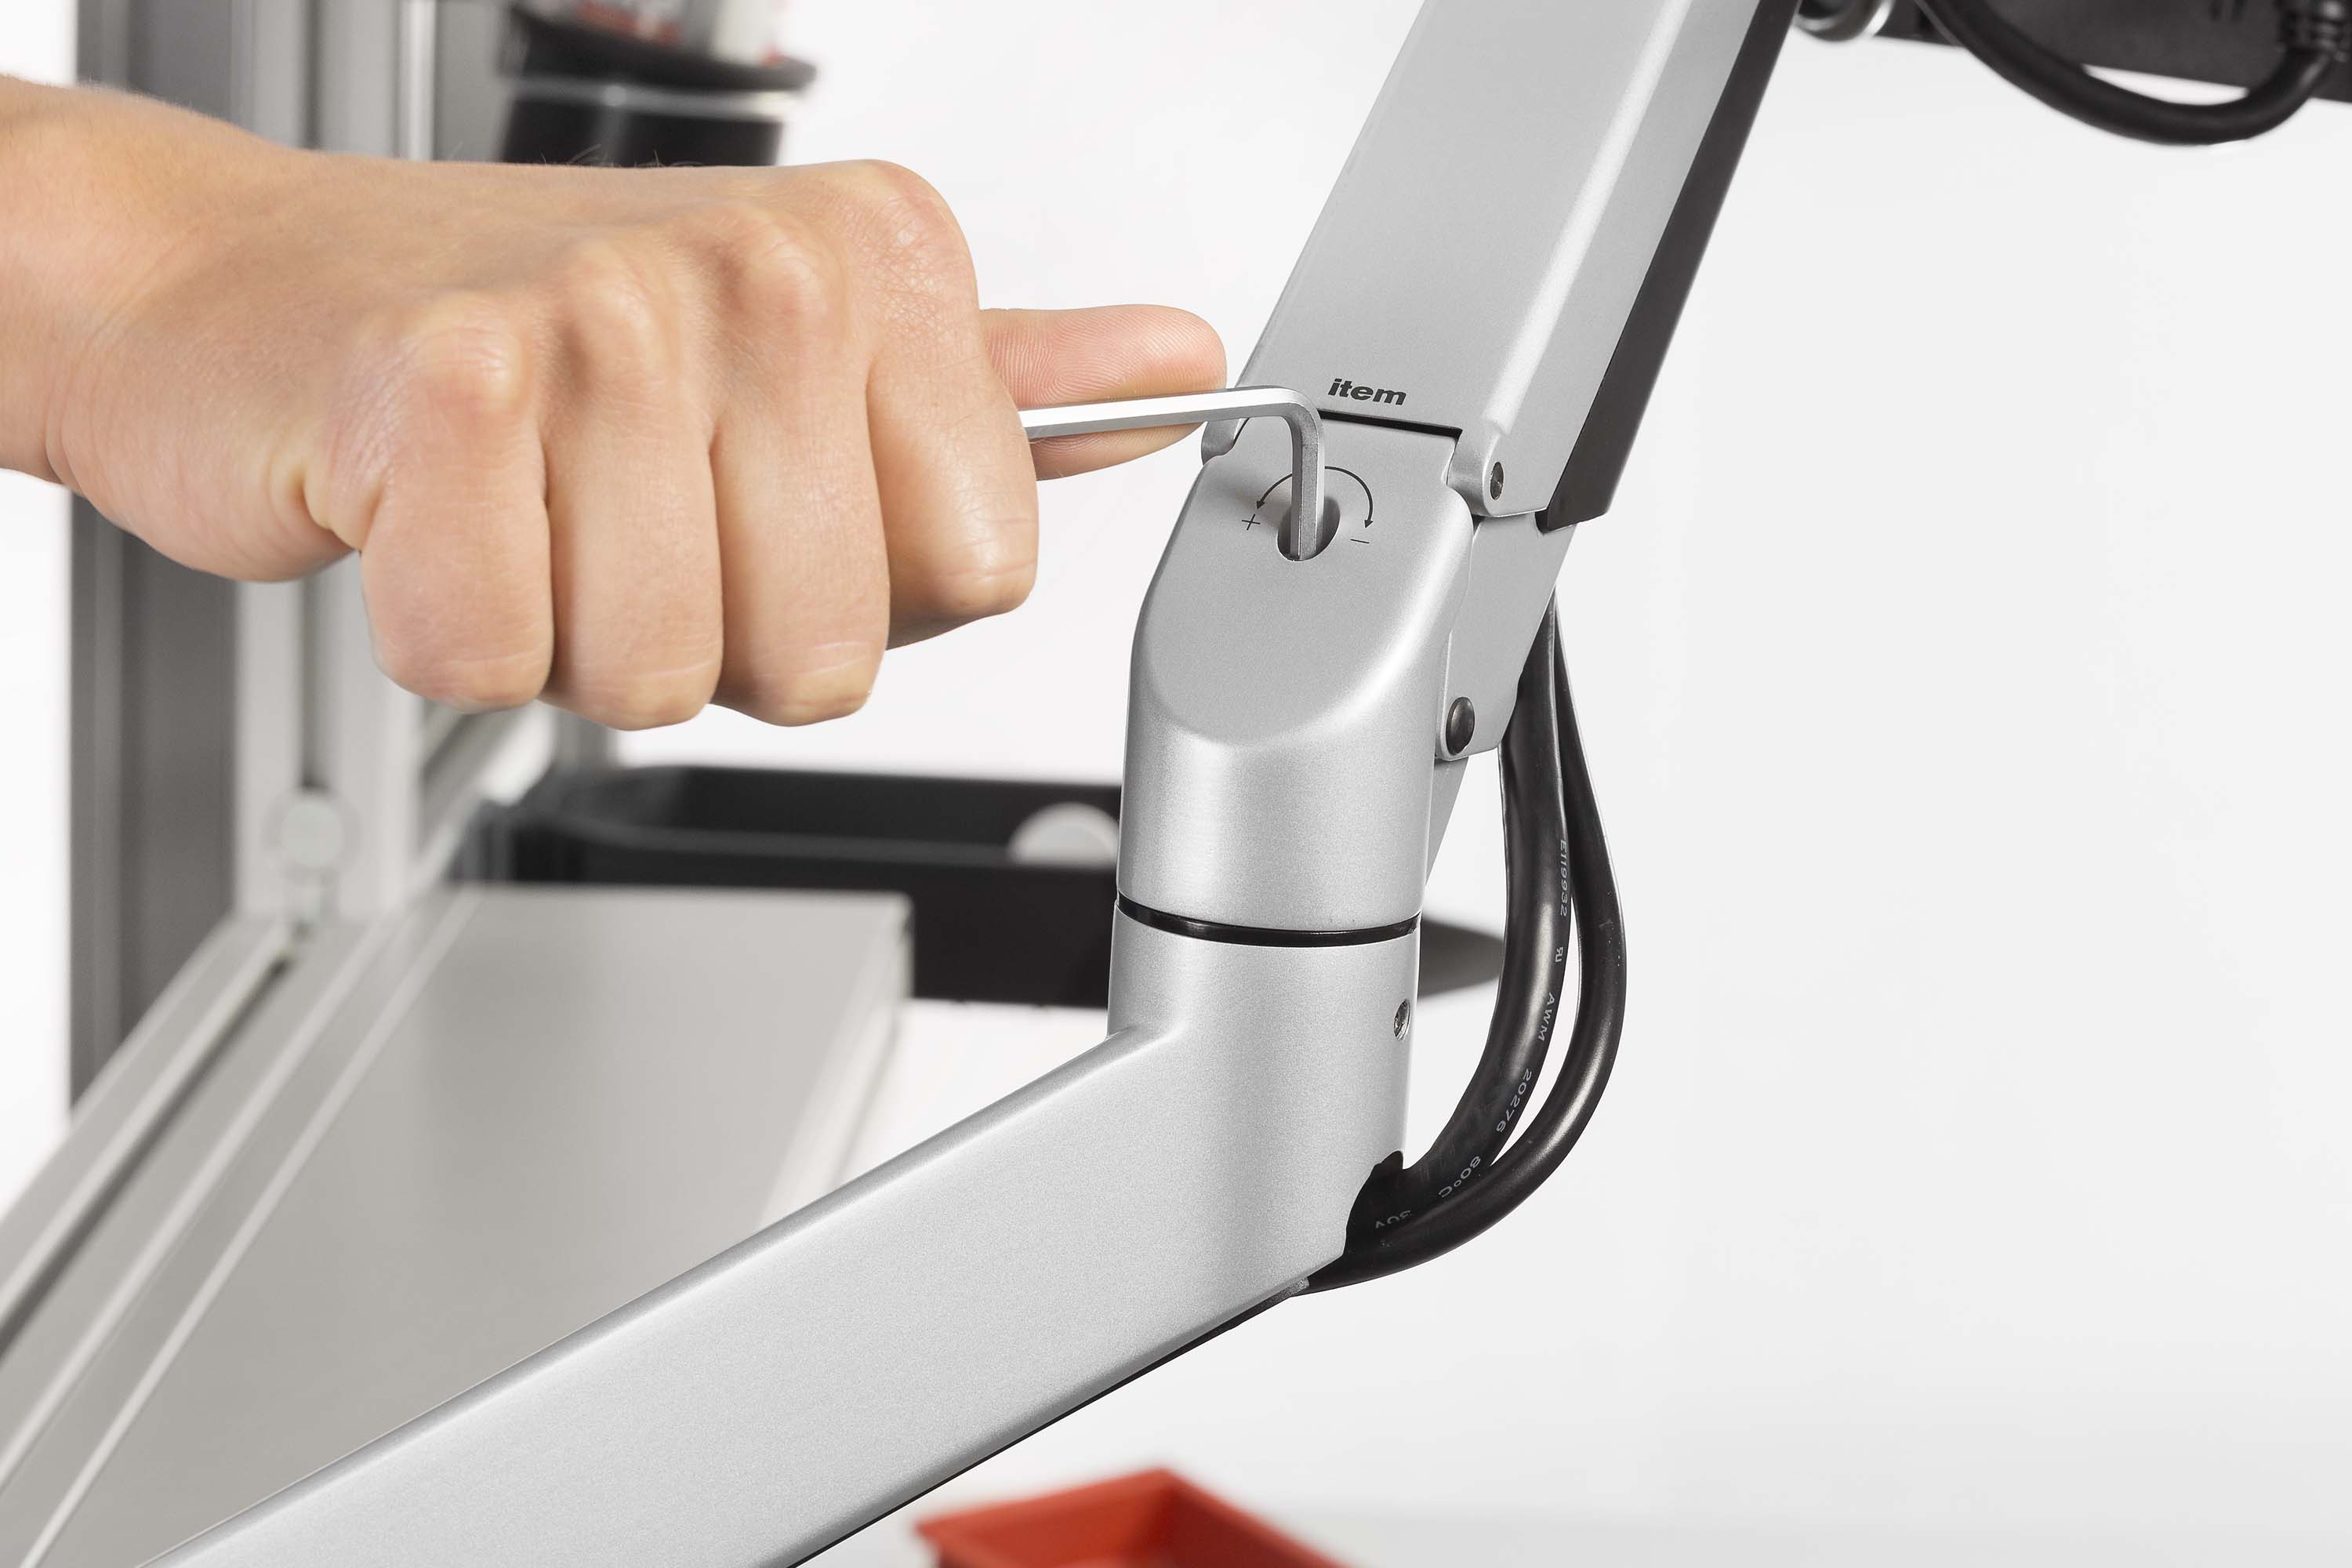 Monitor Arm, height-adjustable, 5 joints